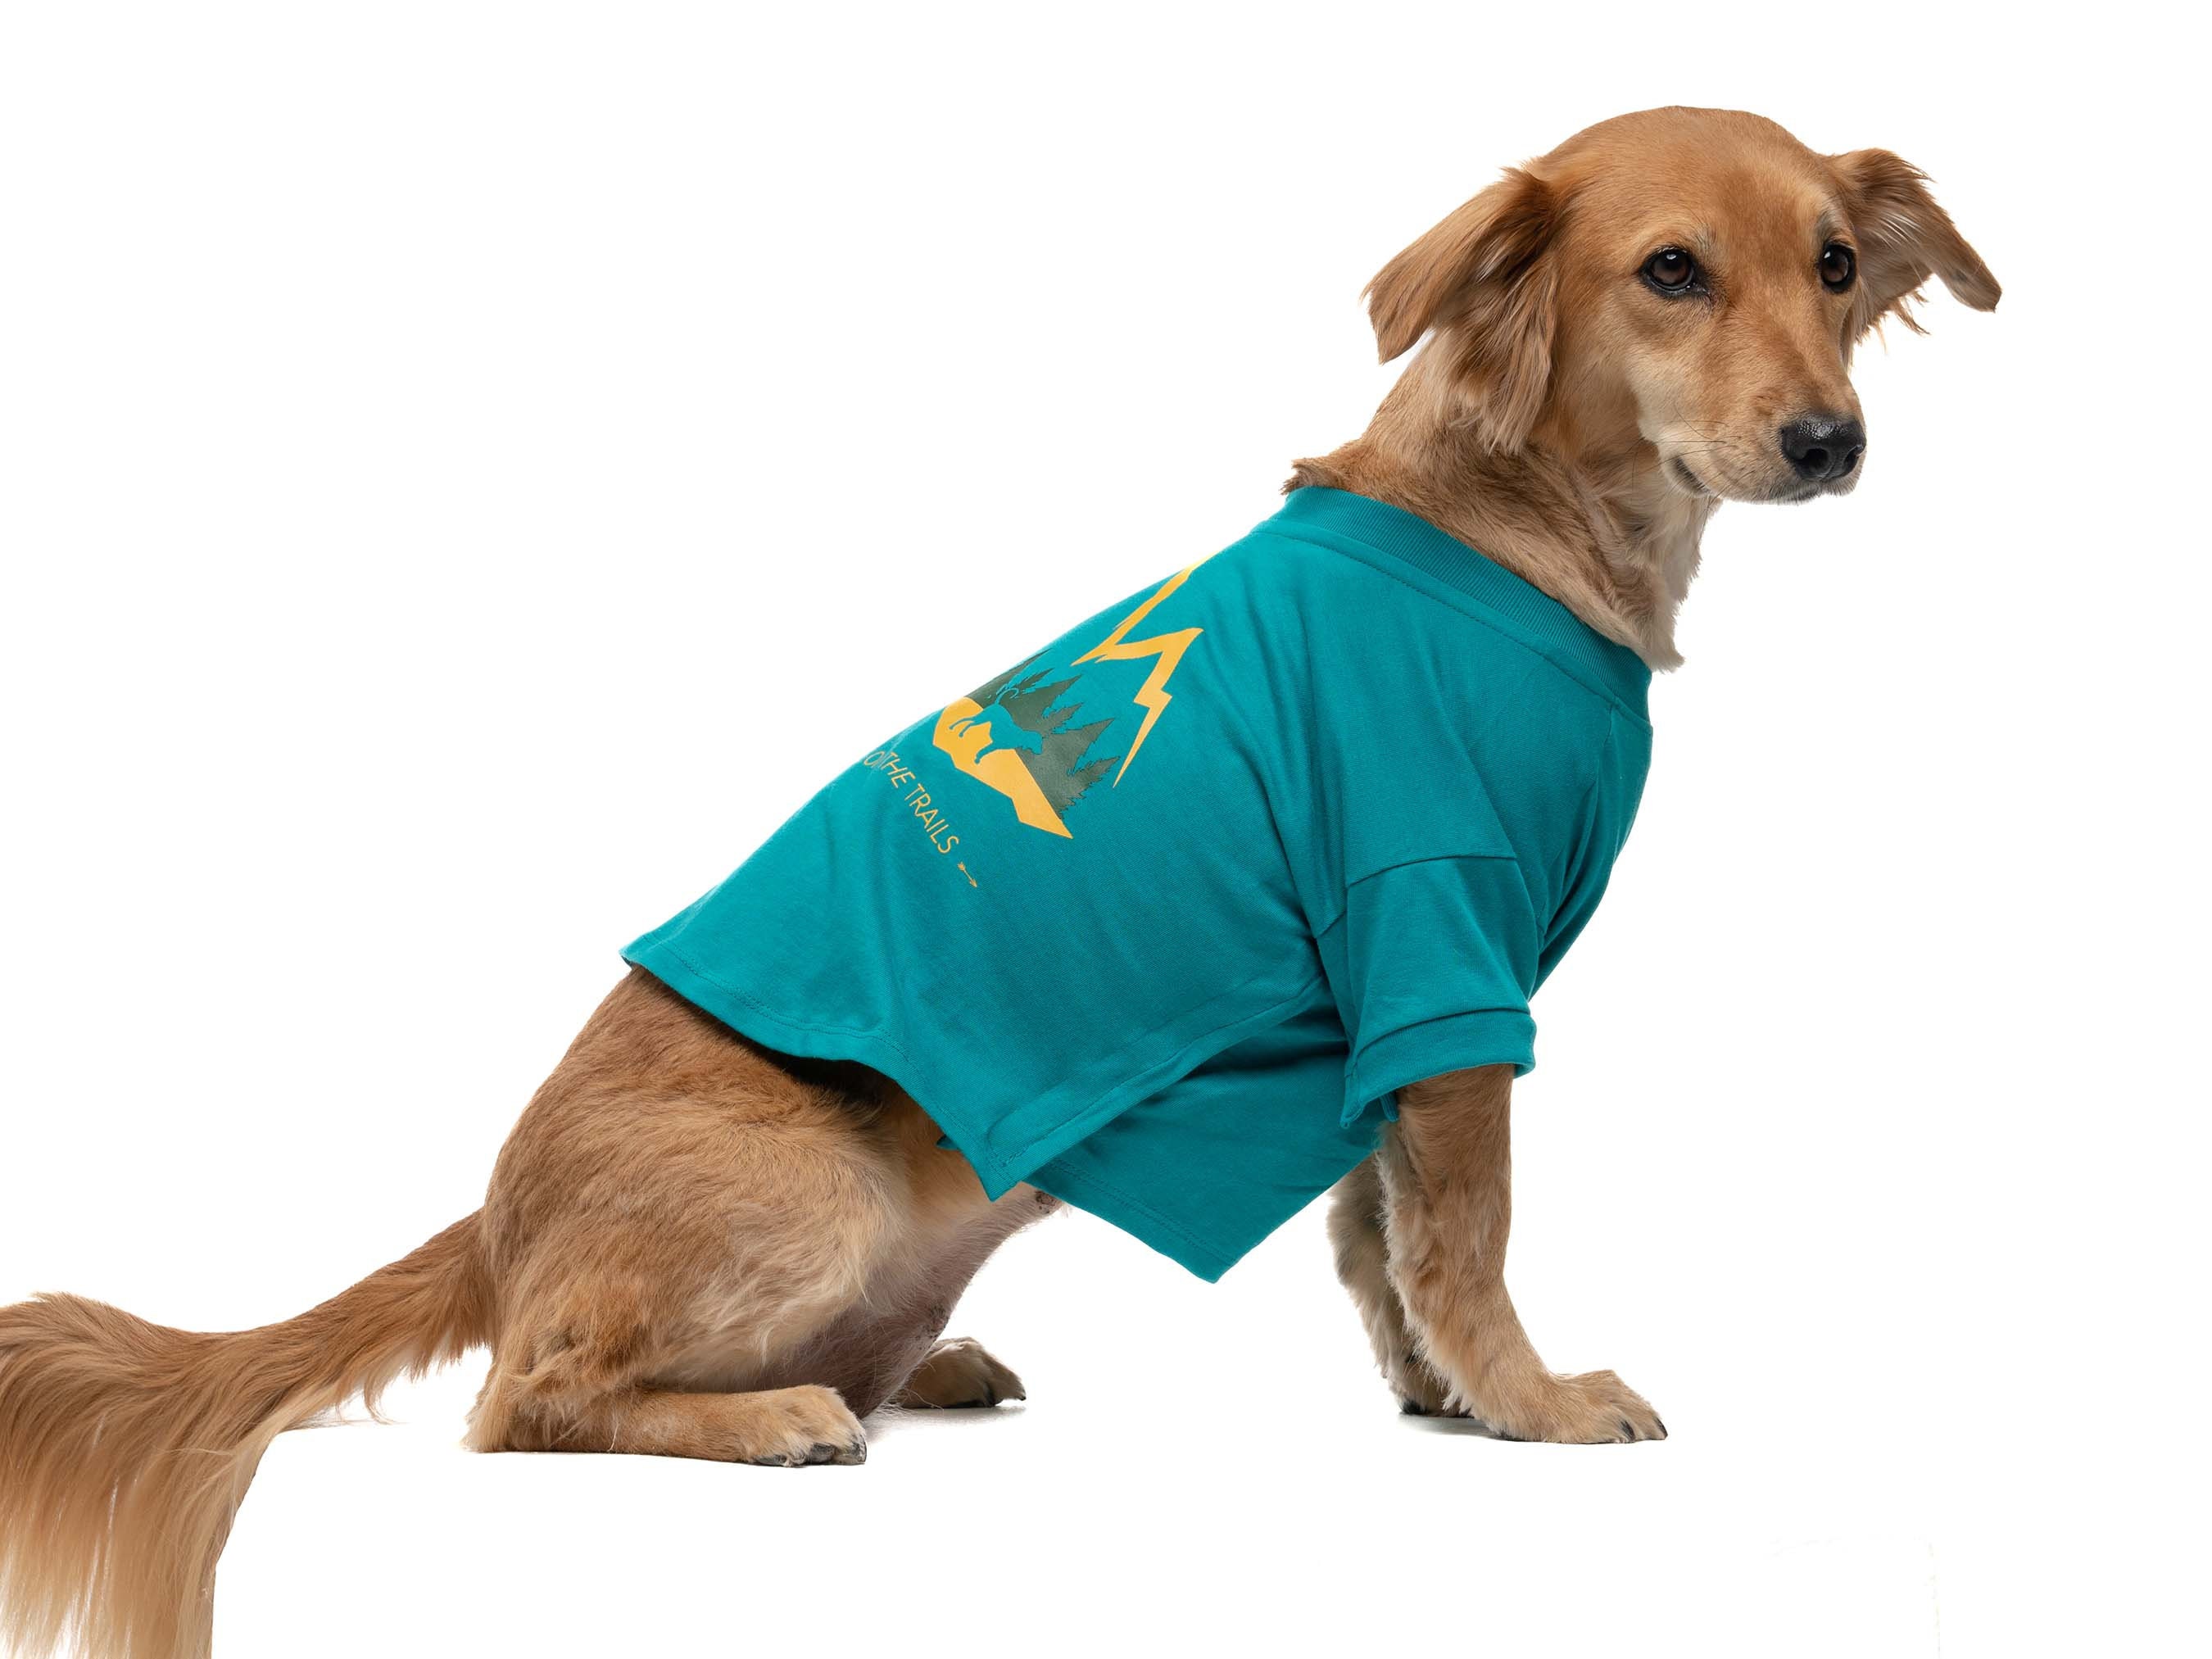 Organic Cotton Dog Shirt for Dogs by Fetch the Sun Designer 